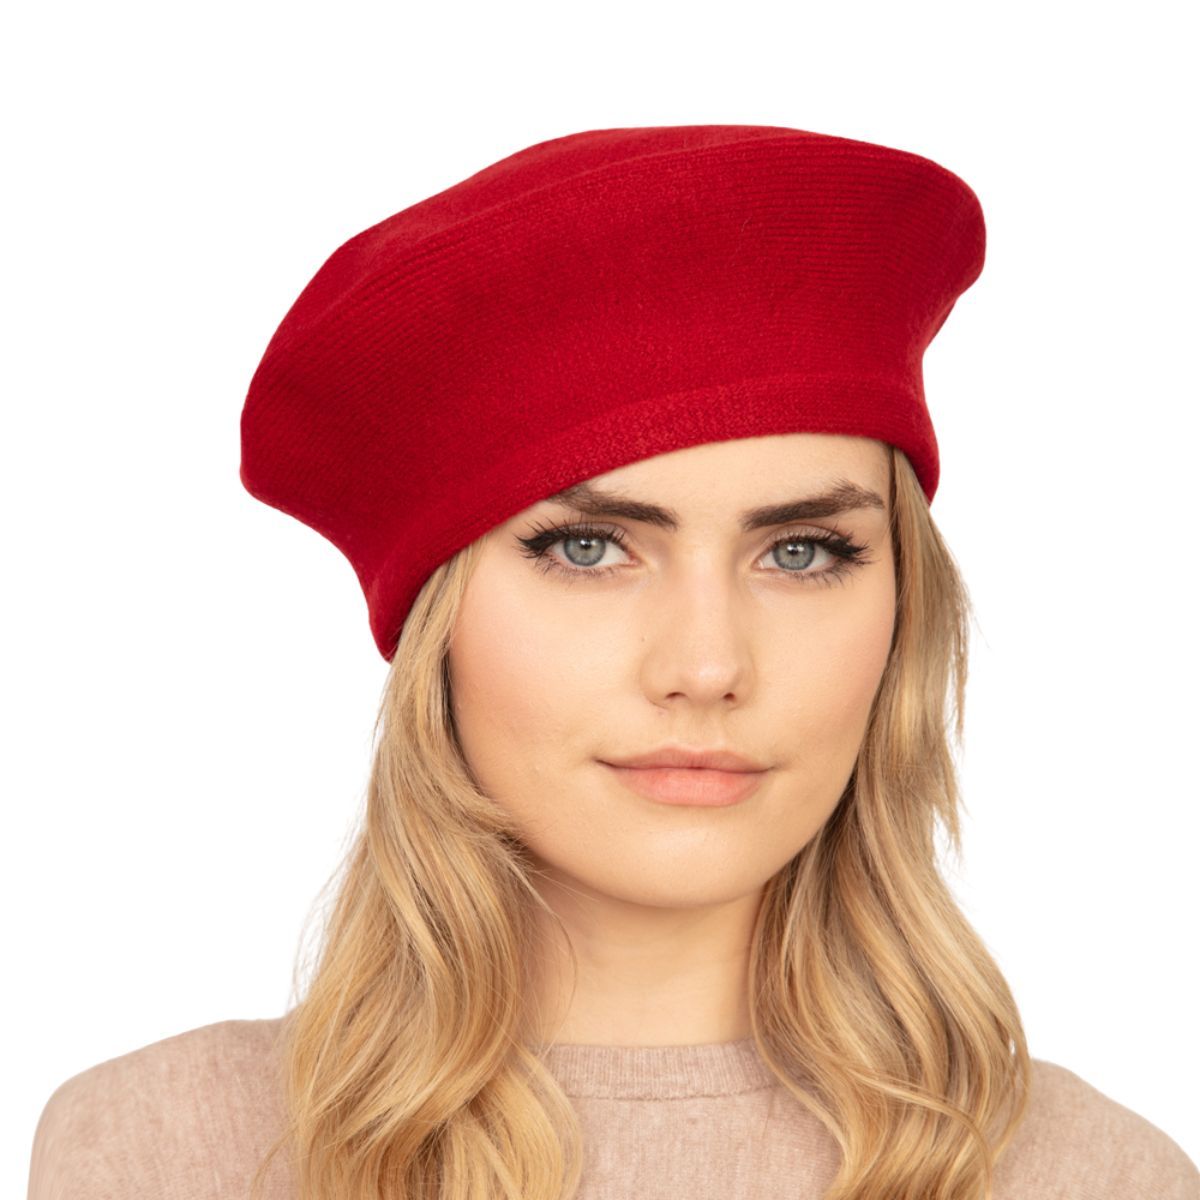 Solid Red Stretchy Beret